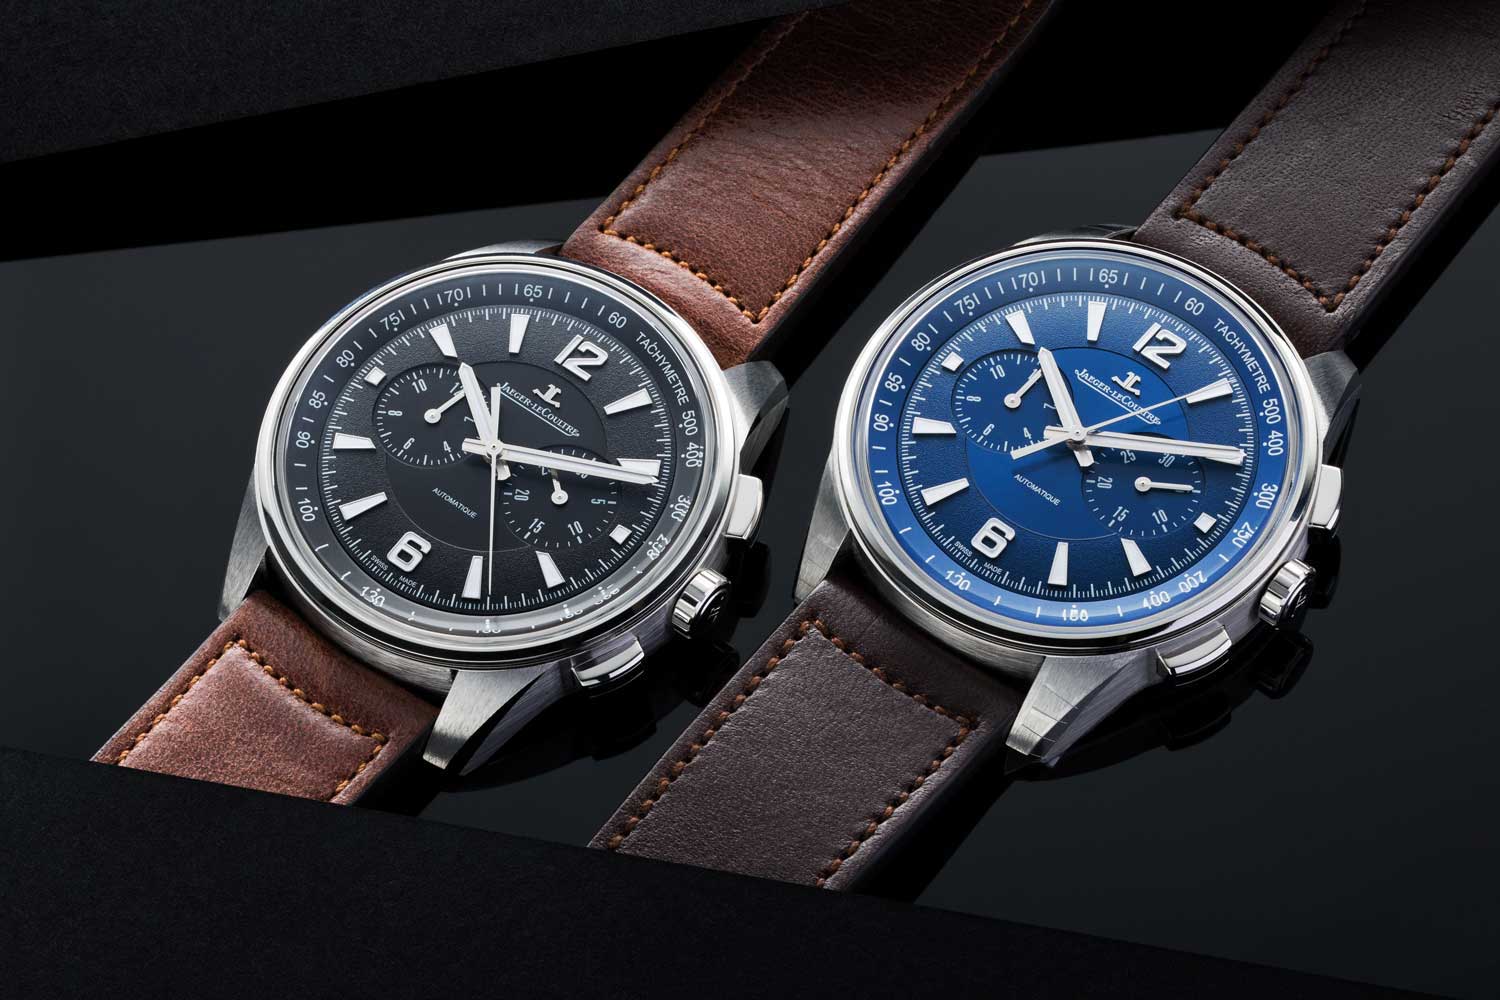 Jaeger-LeCoultre Polaris Chronograph, driven by the cal. 751